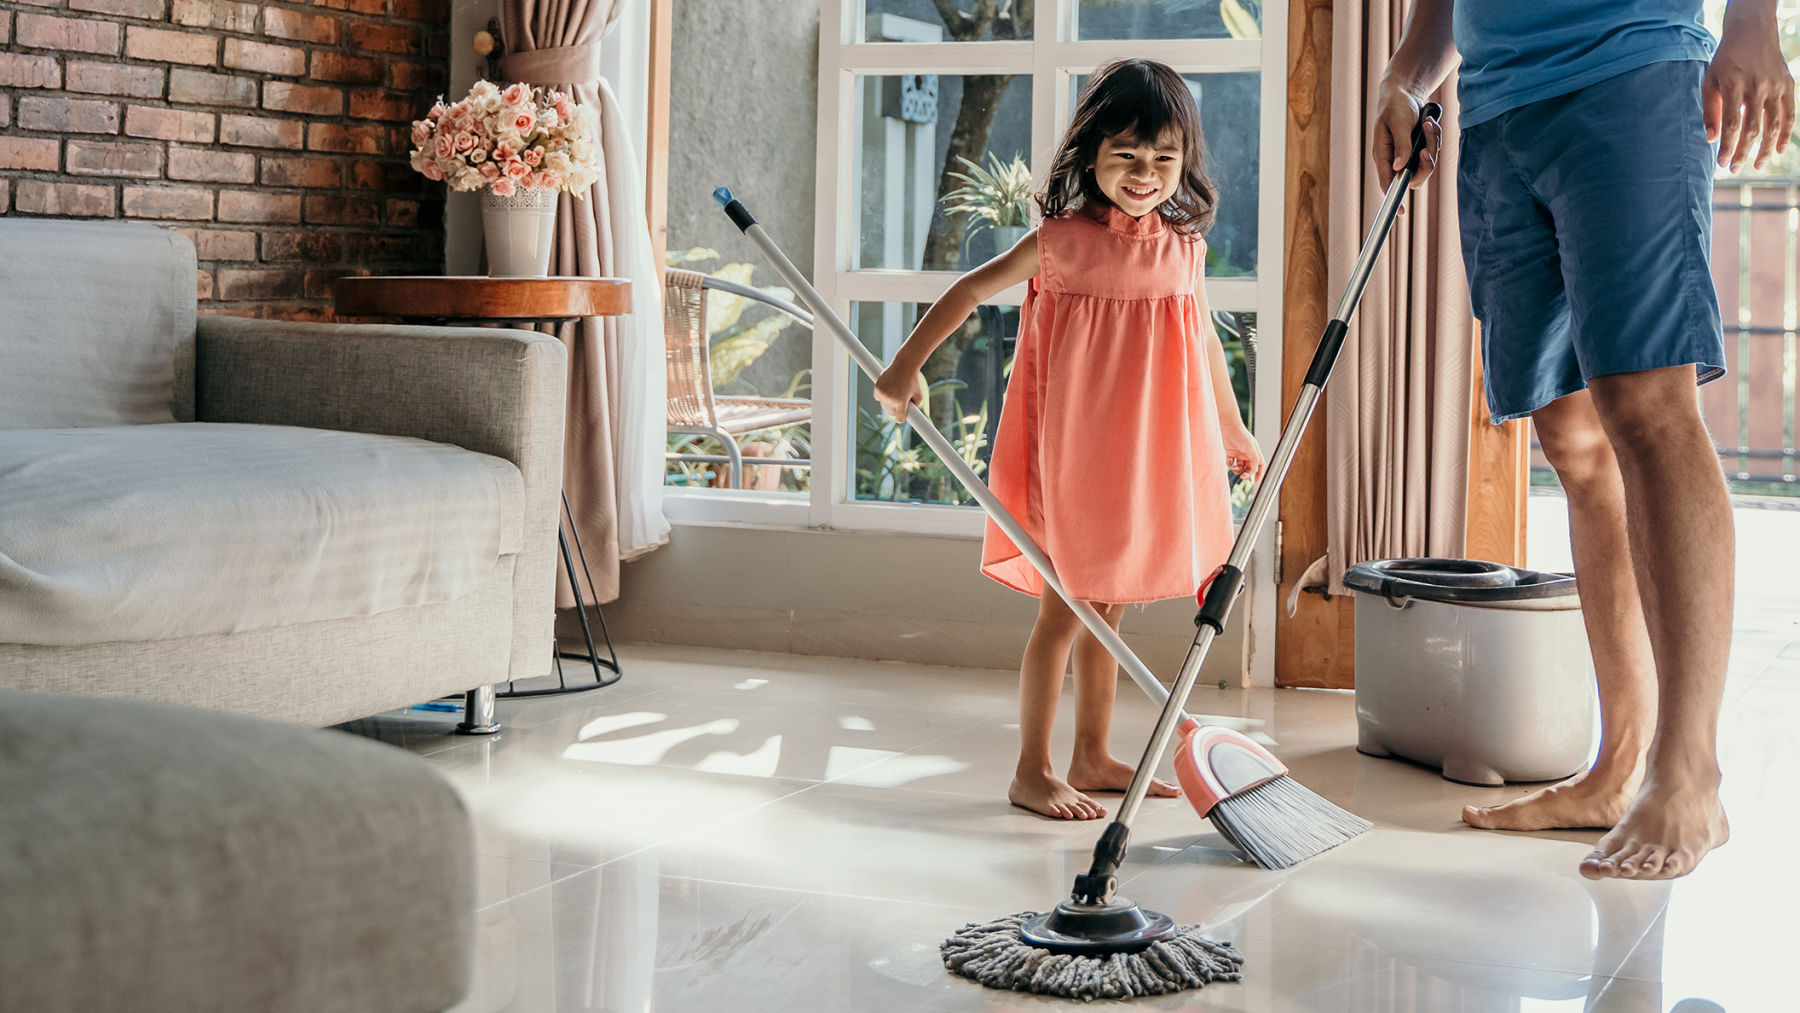 Image of family mopping and sweeping.